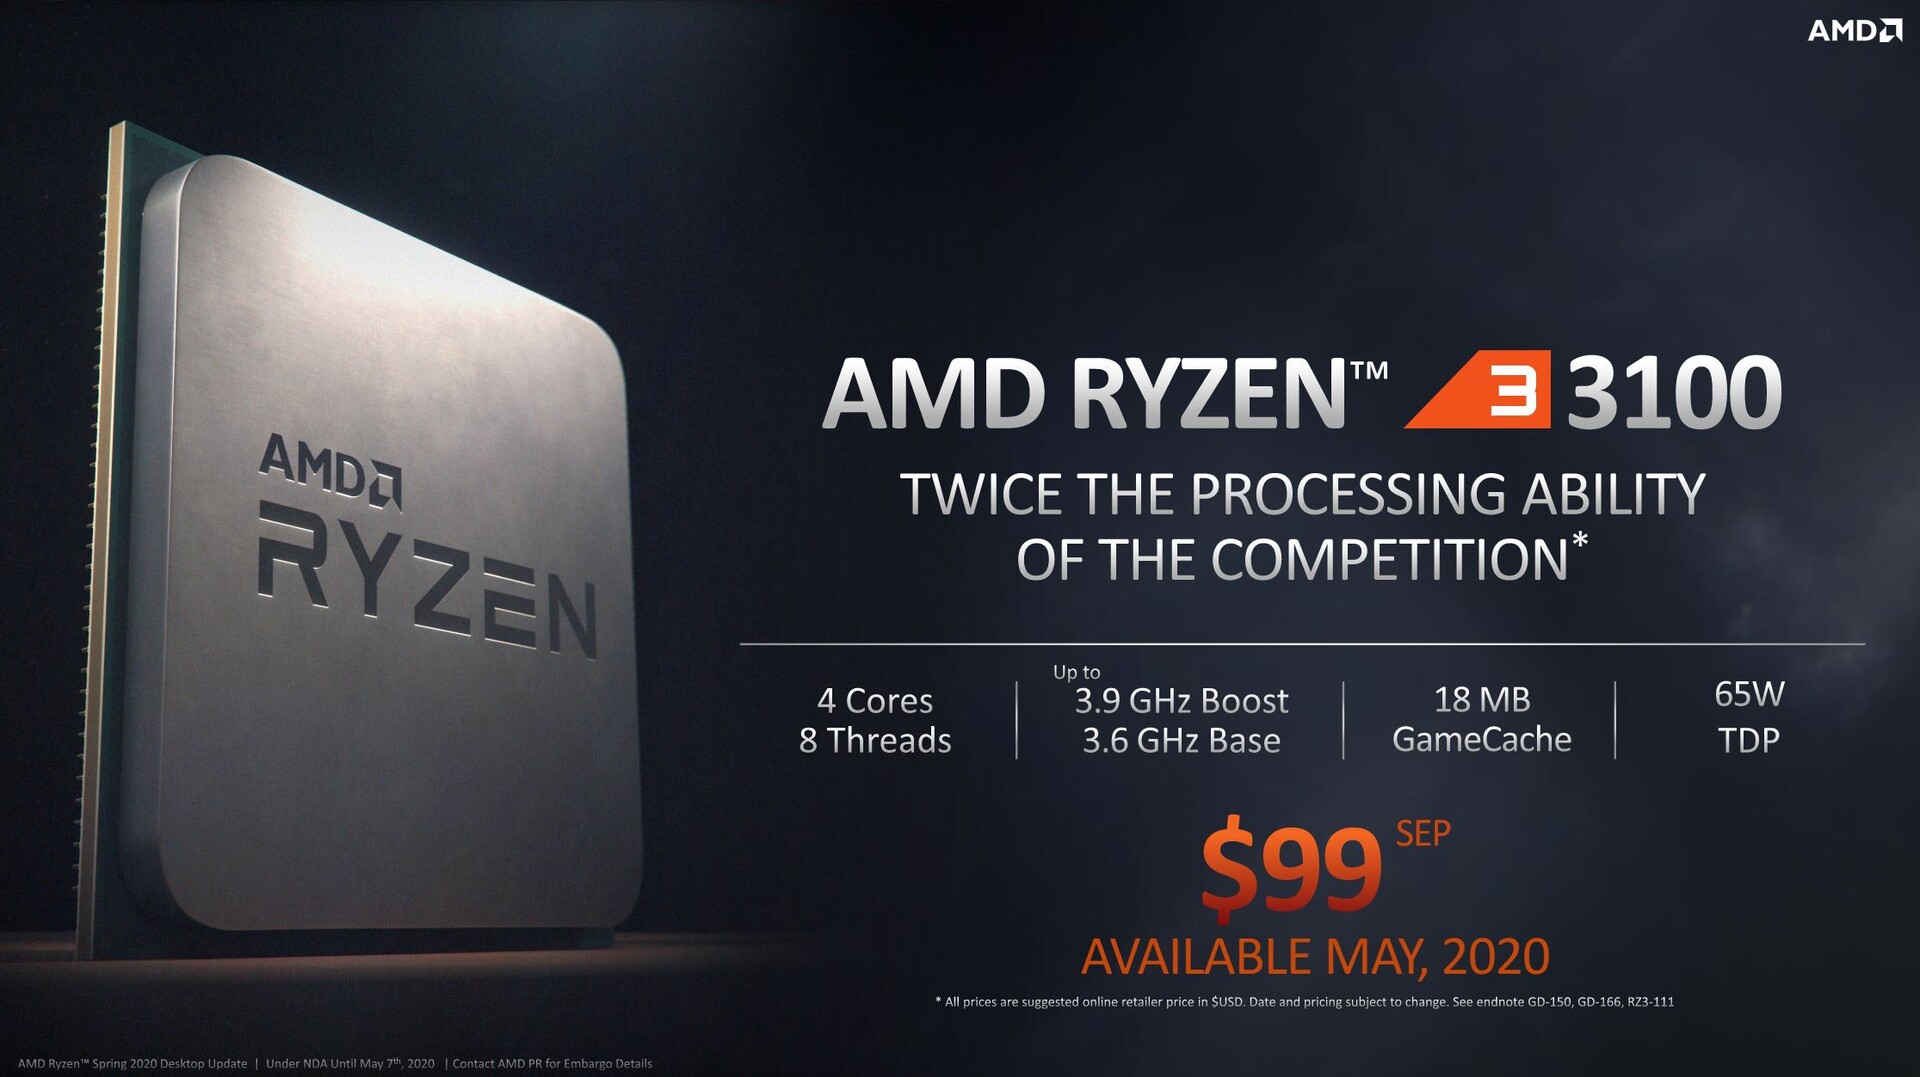 AMD Ryzen 3 finally with 4 cores and 8 threads - NotebookCheck.net Reviews